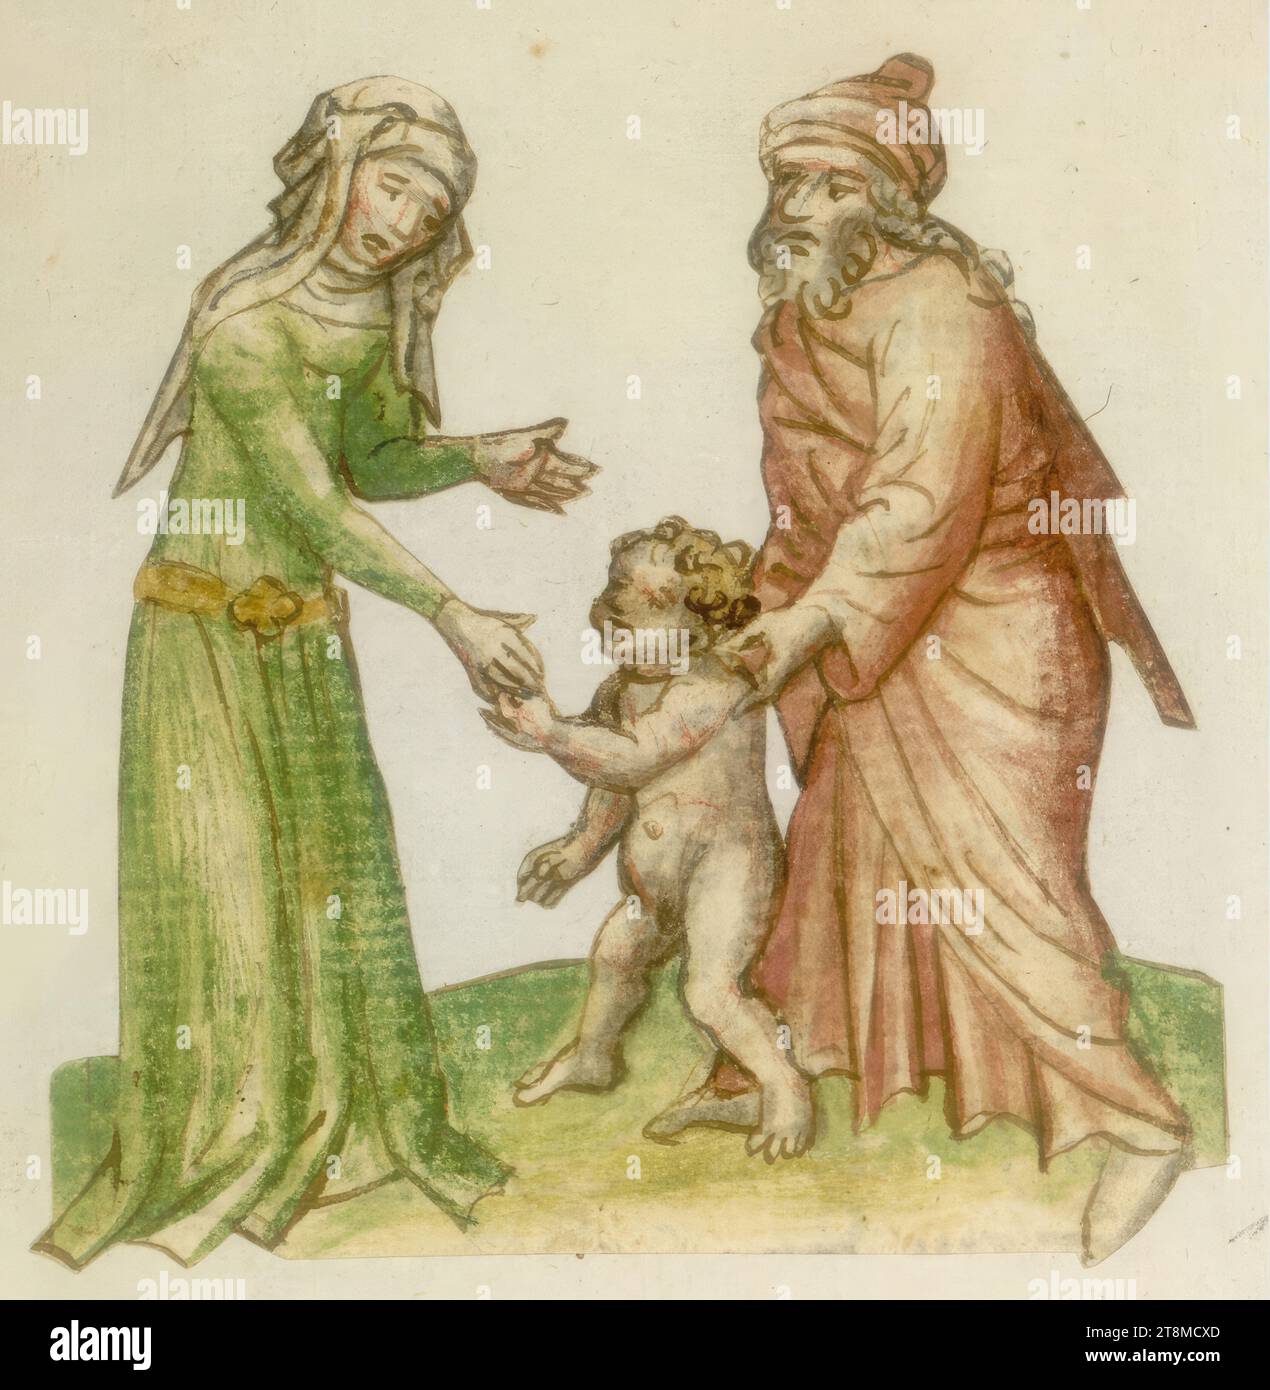 Little Moses and his foster parents?, History Bible, Anonymous, 1420-1430, Drawing, Colored pen drawing Stock Photo